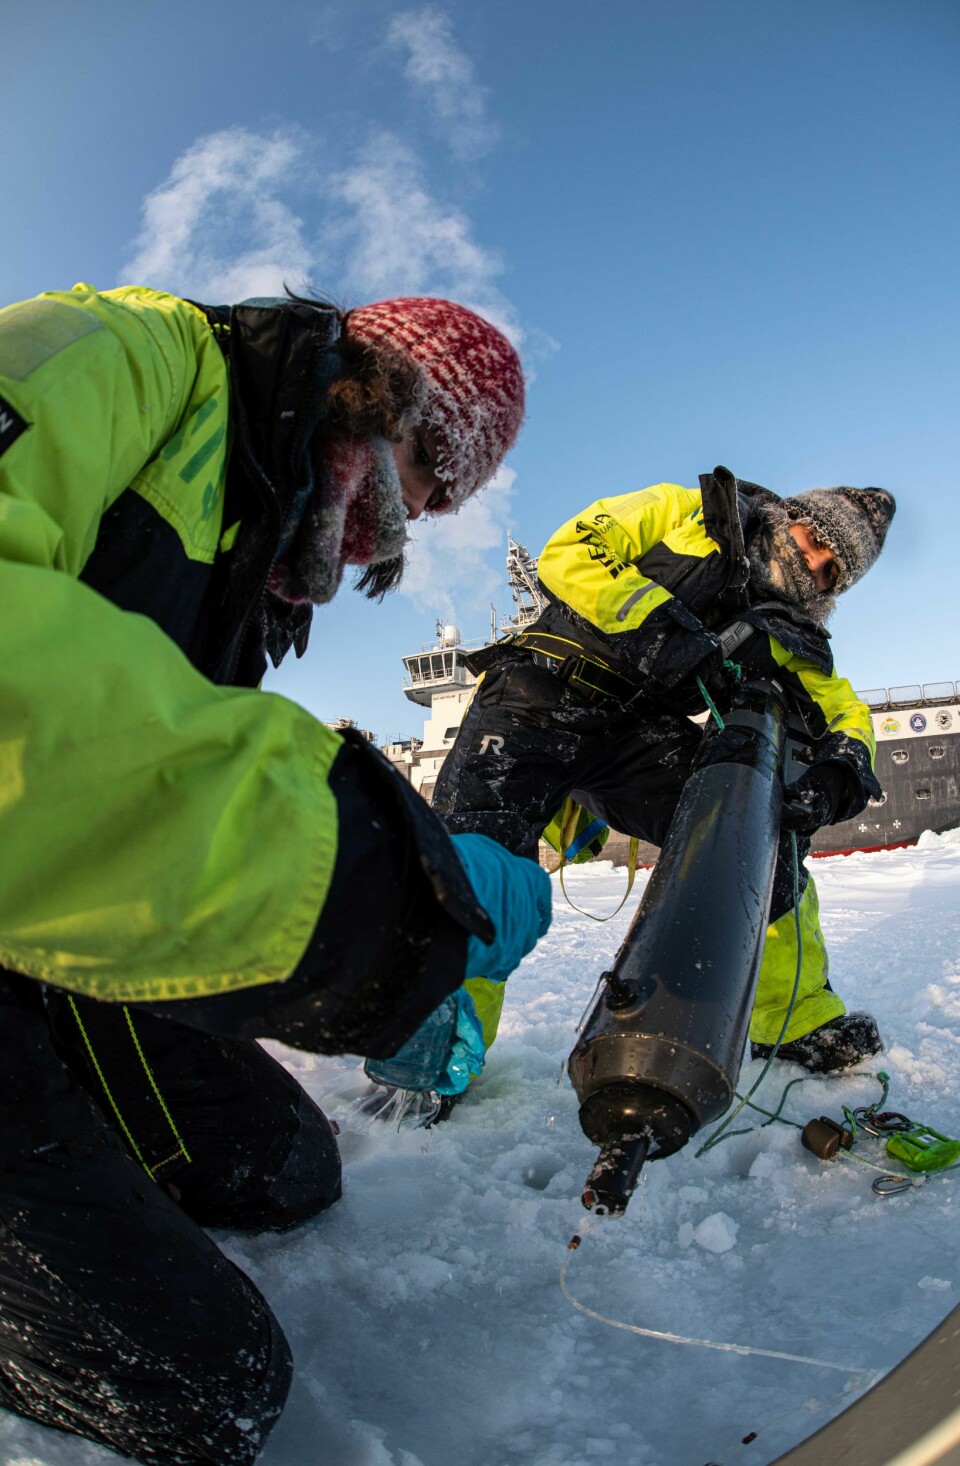 Cheshtaa (to the right) working on the sea ice, retrieving a water sampling bottle from an ice hole